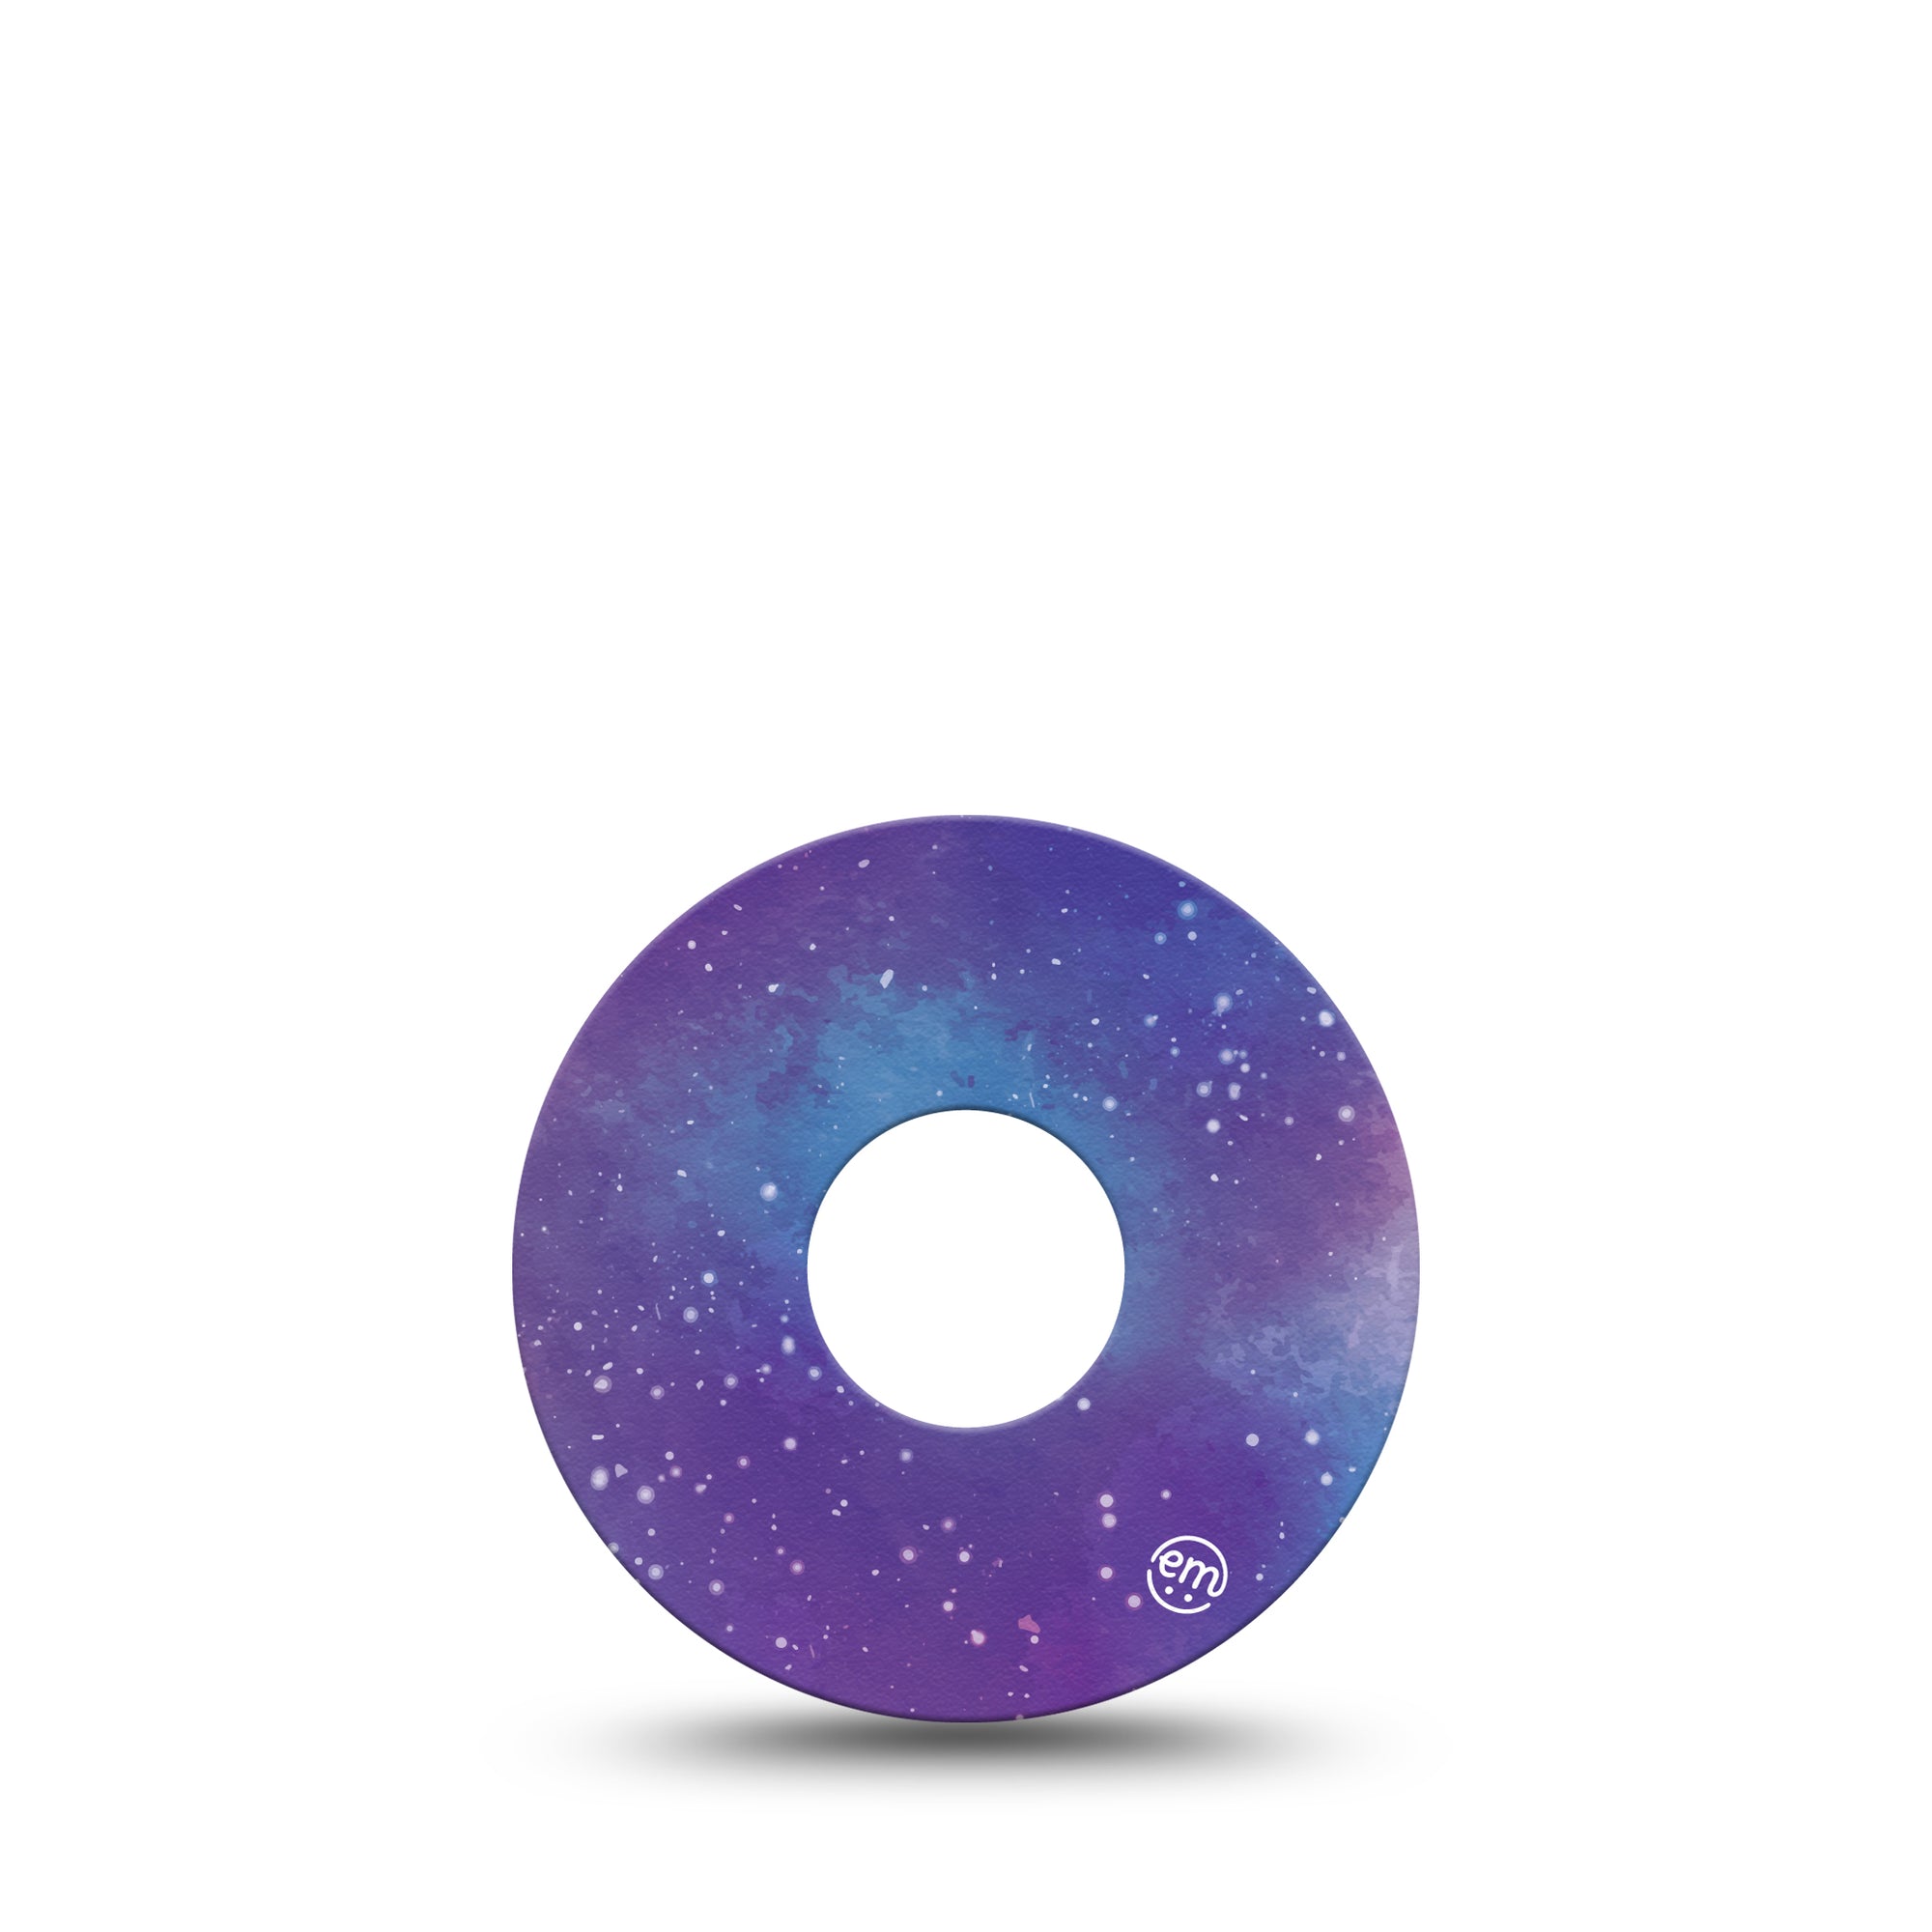 ExpressionMed Galaxy Libre 3 Tape, Single, Star Constallations Inspired, CGM Overlay Patch Design